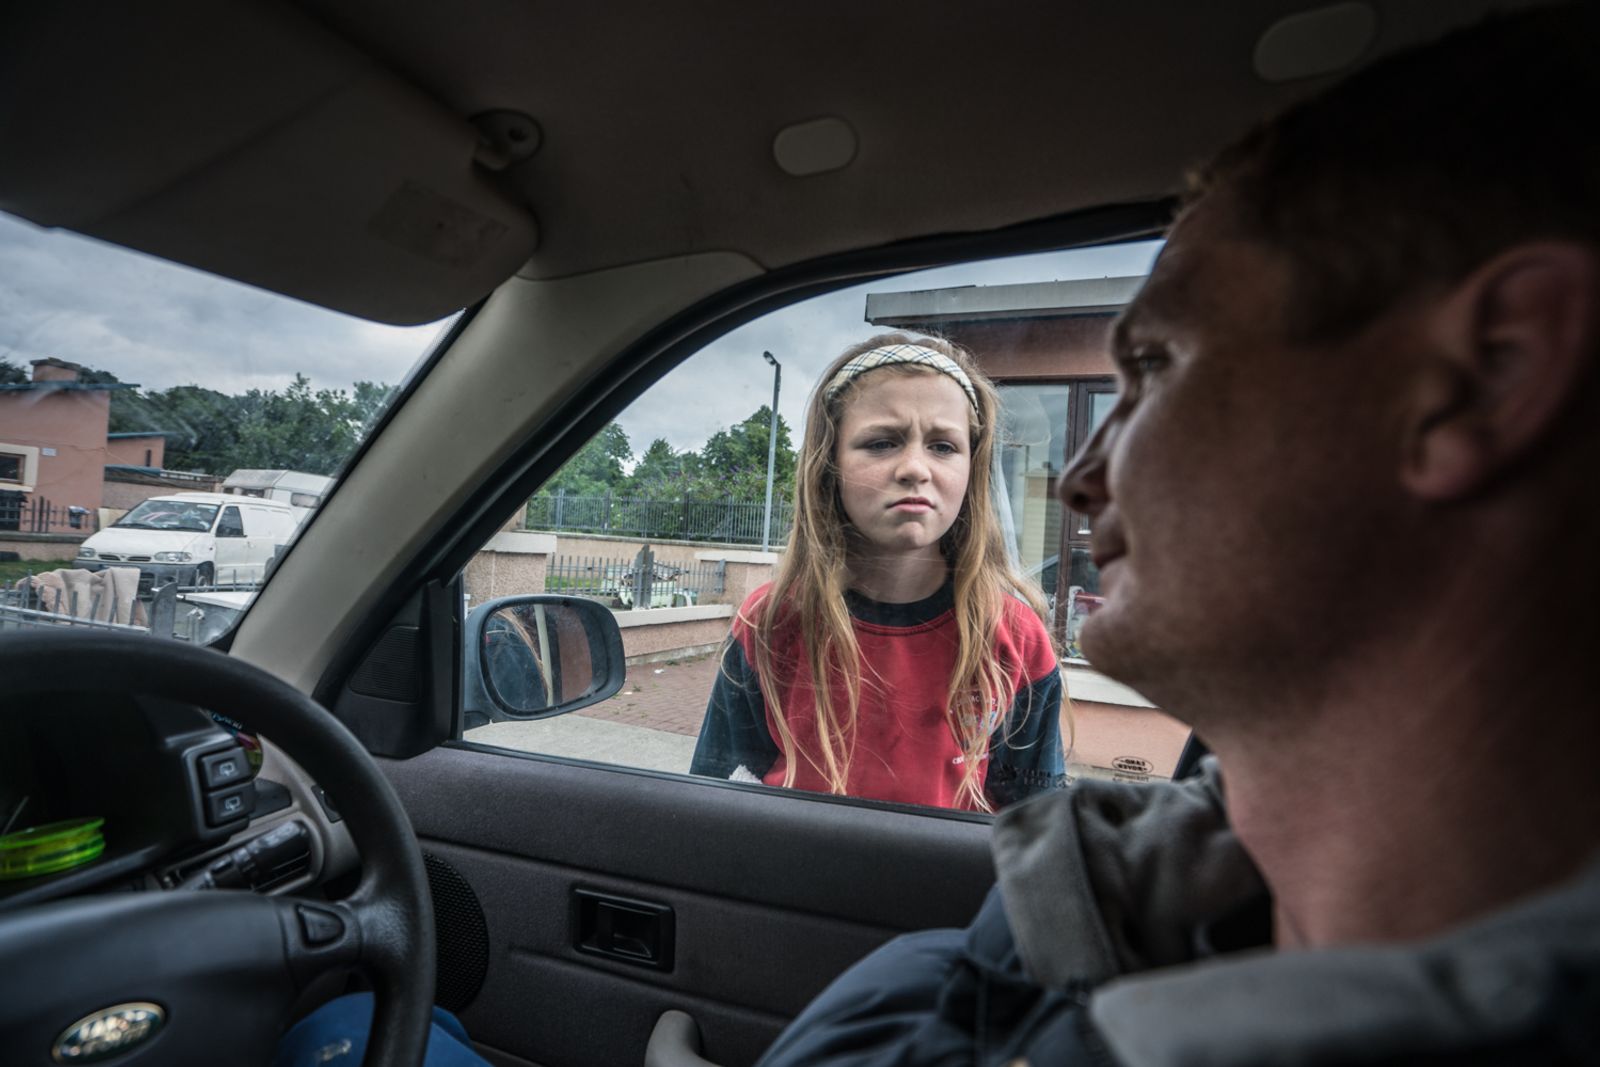 © Stephen Gerard Kelly - Megan (12) shows her frustration after asking her father Michael (32) for money to buy candy.